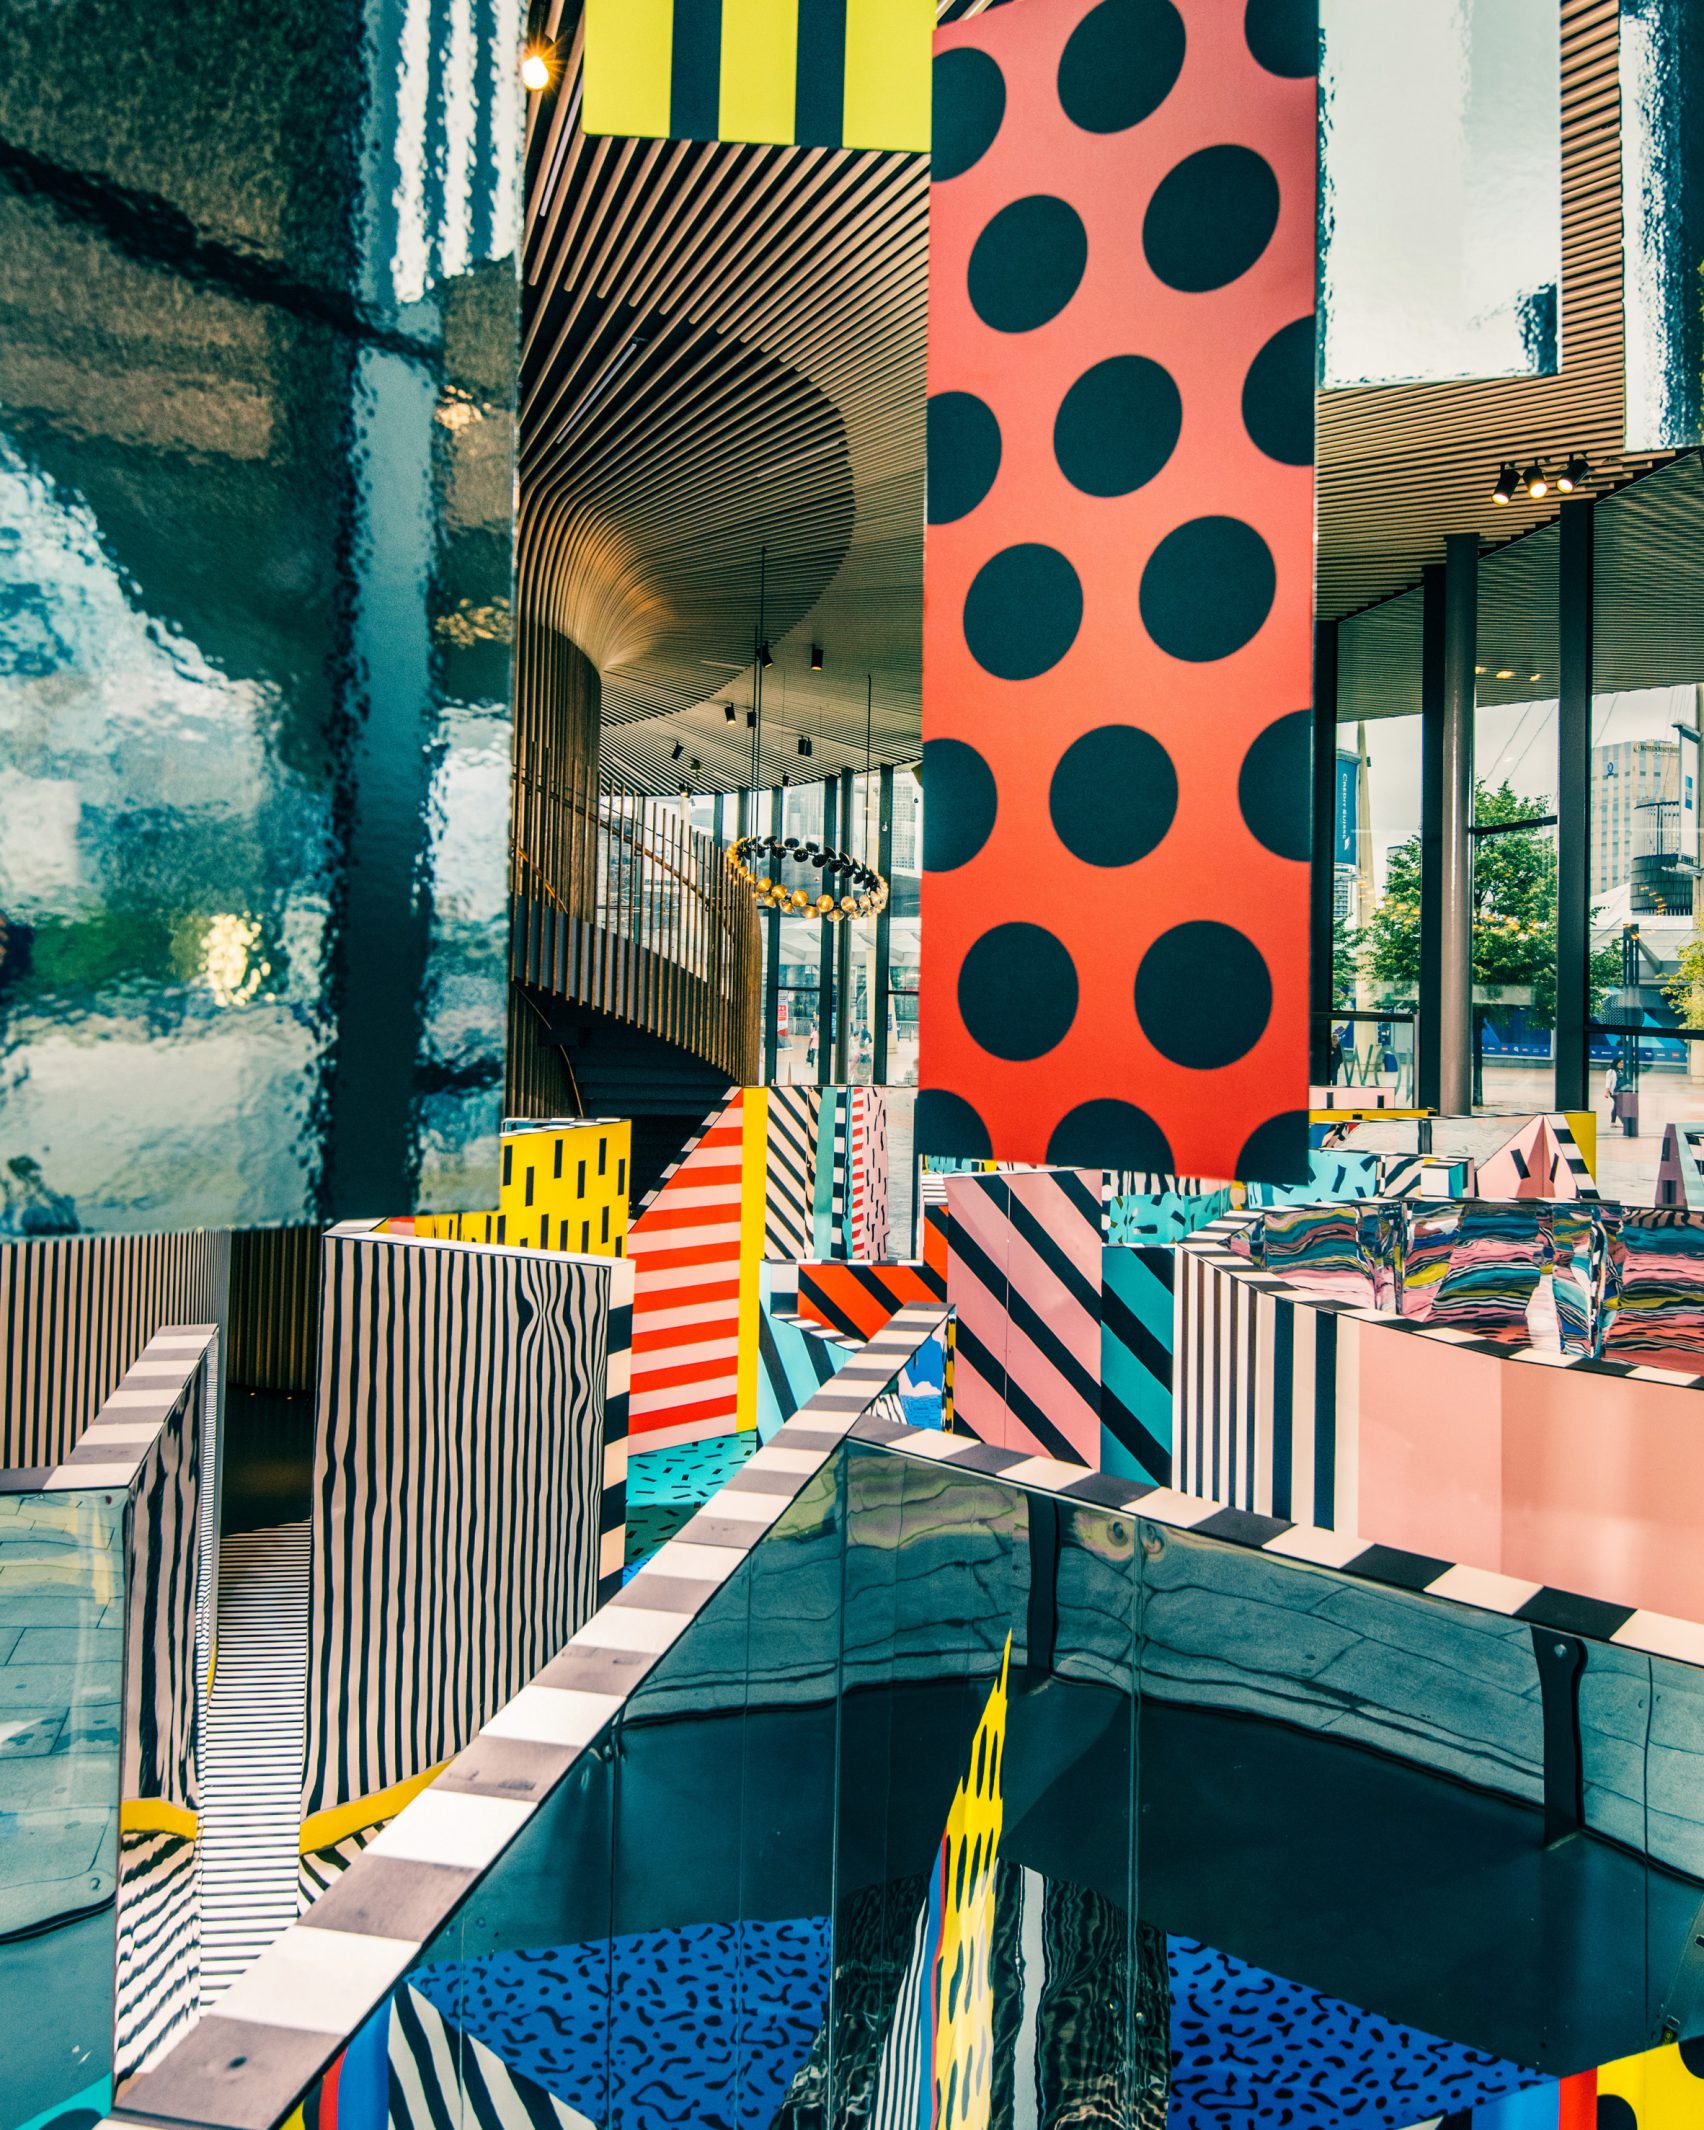 camille-walala-play-installation-now-gallery-london_dezeen_2364_col_10-1704x2130